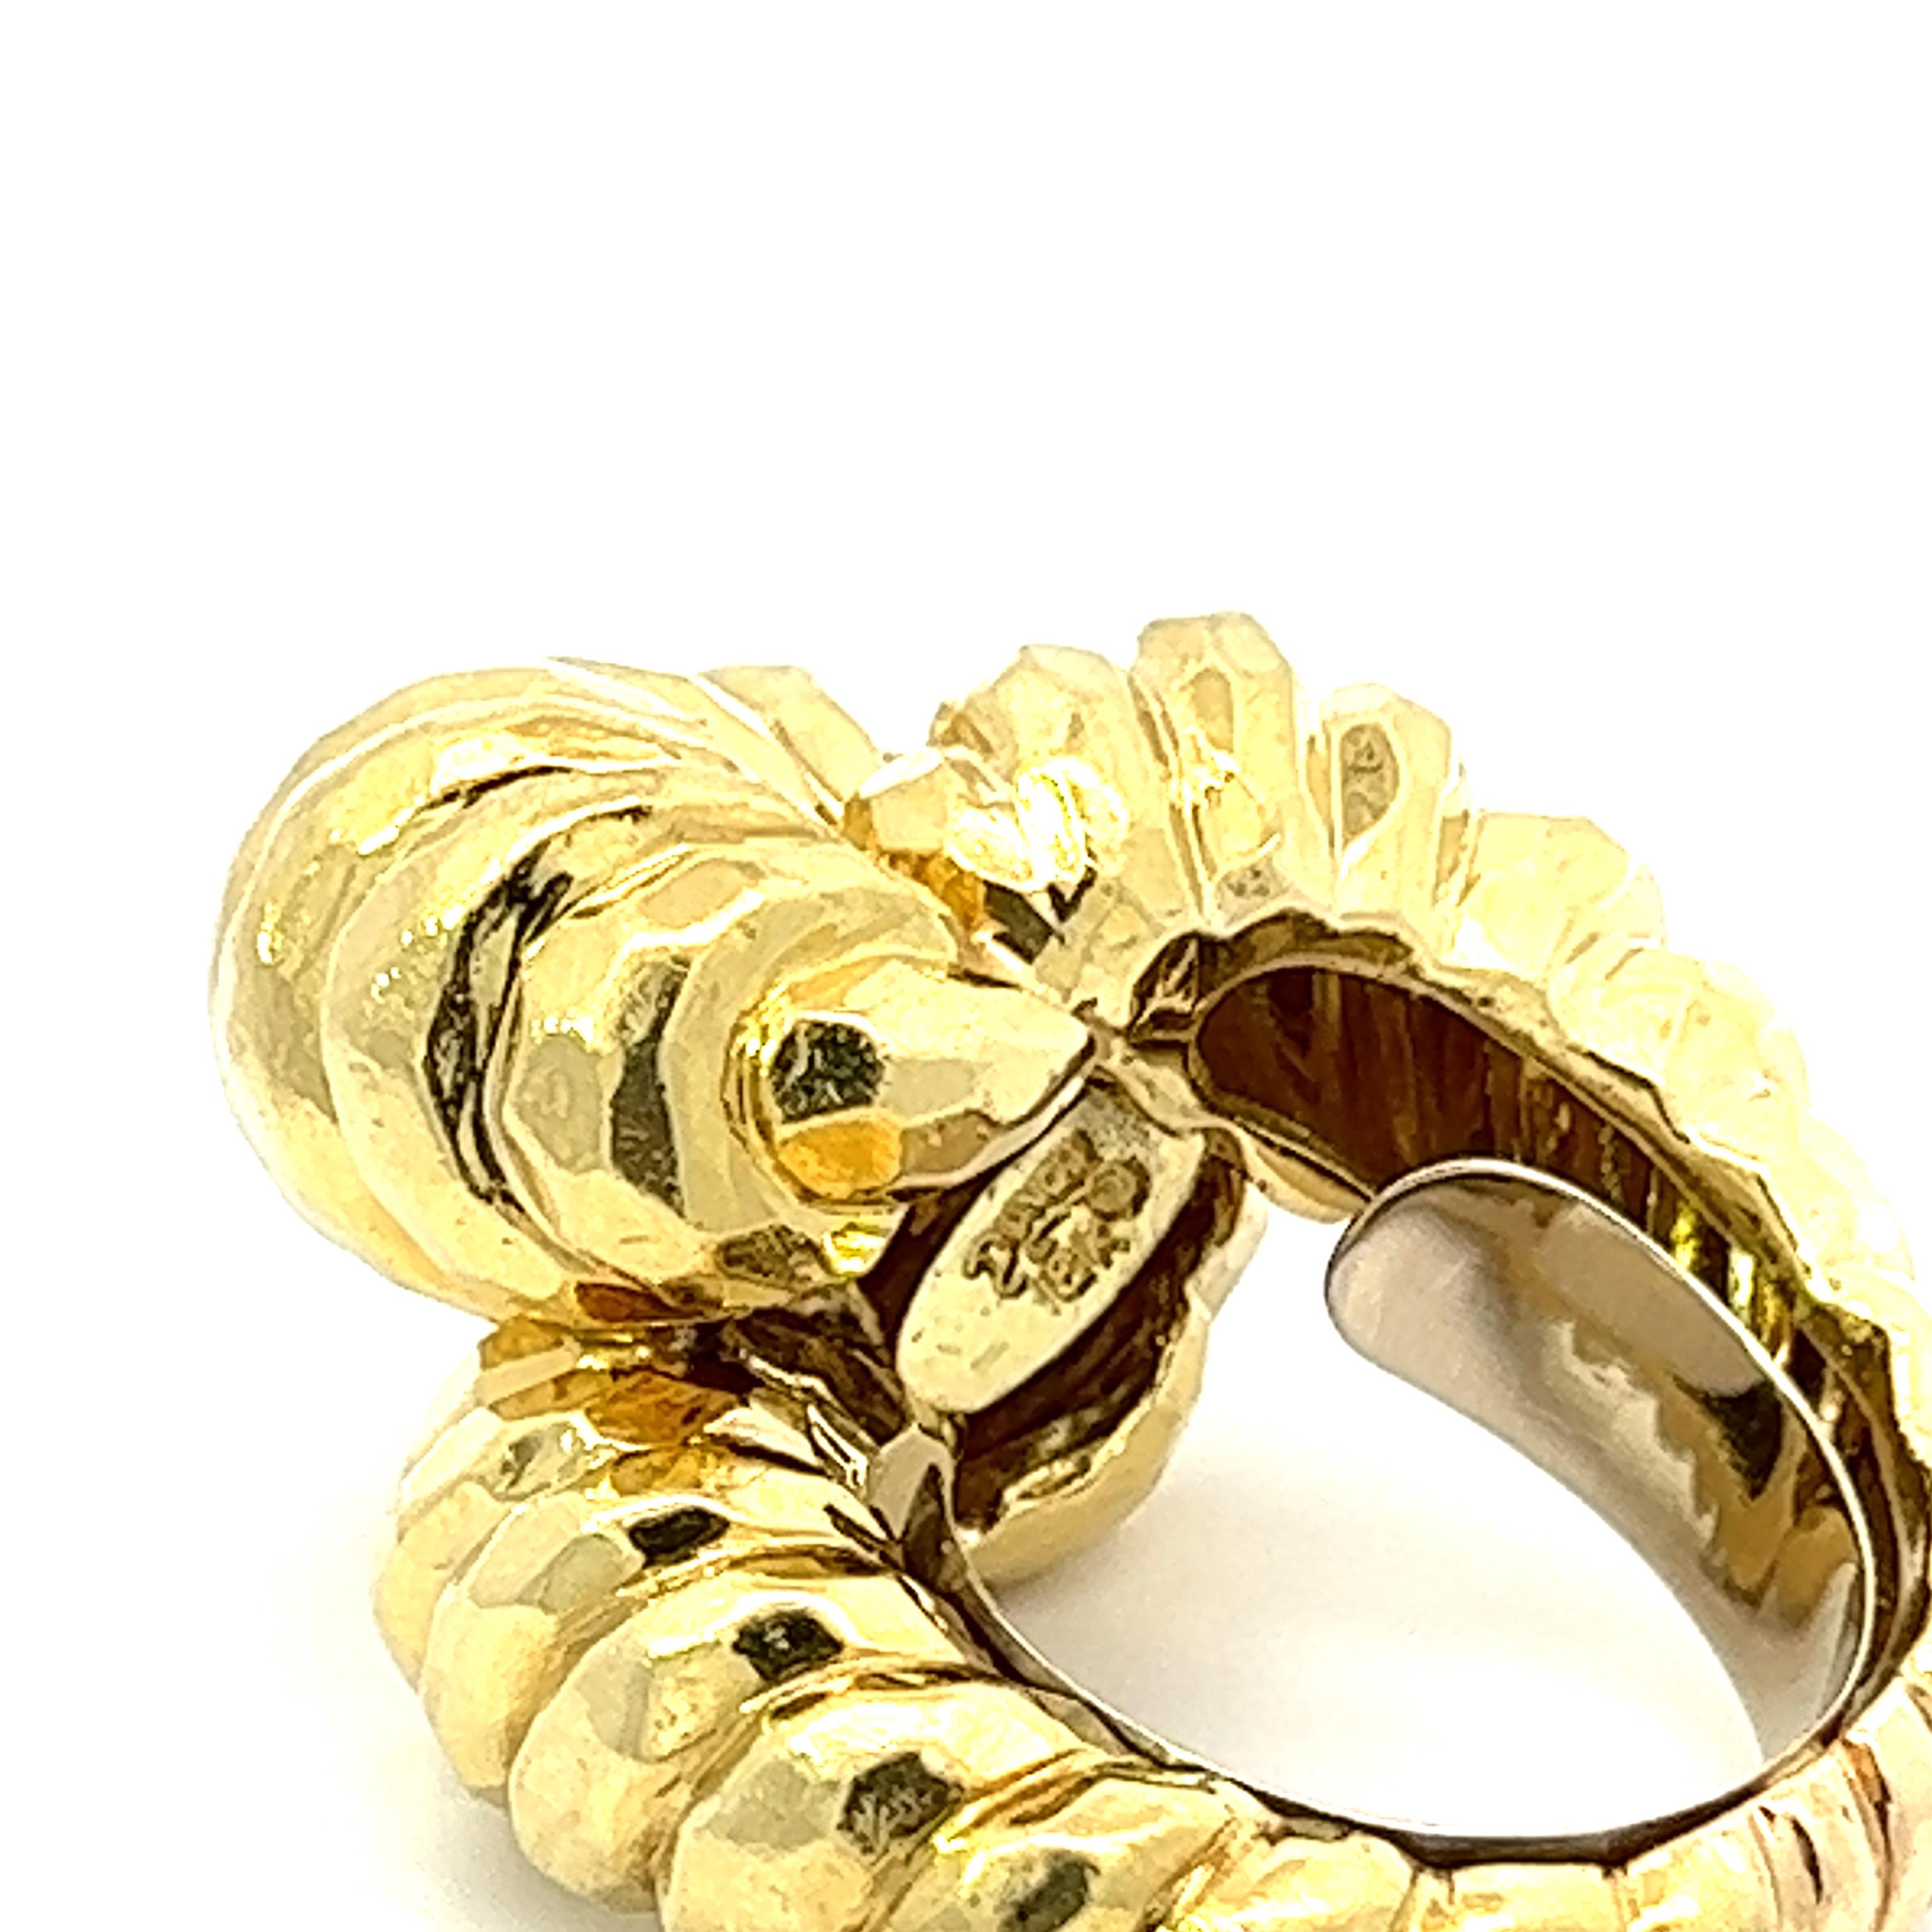 Material: Solid 18k Yellow Gold
Weight: 35.34 Grams
Ring Size: Due to the Horse Shoe It Can Fit Between 8 & 8.5 (we can NOT size this ring)
Ring Width: 22.7mm (0.89